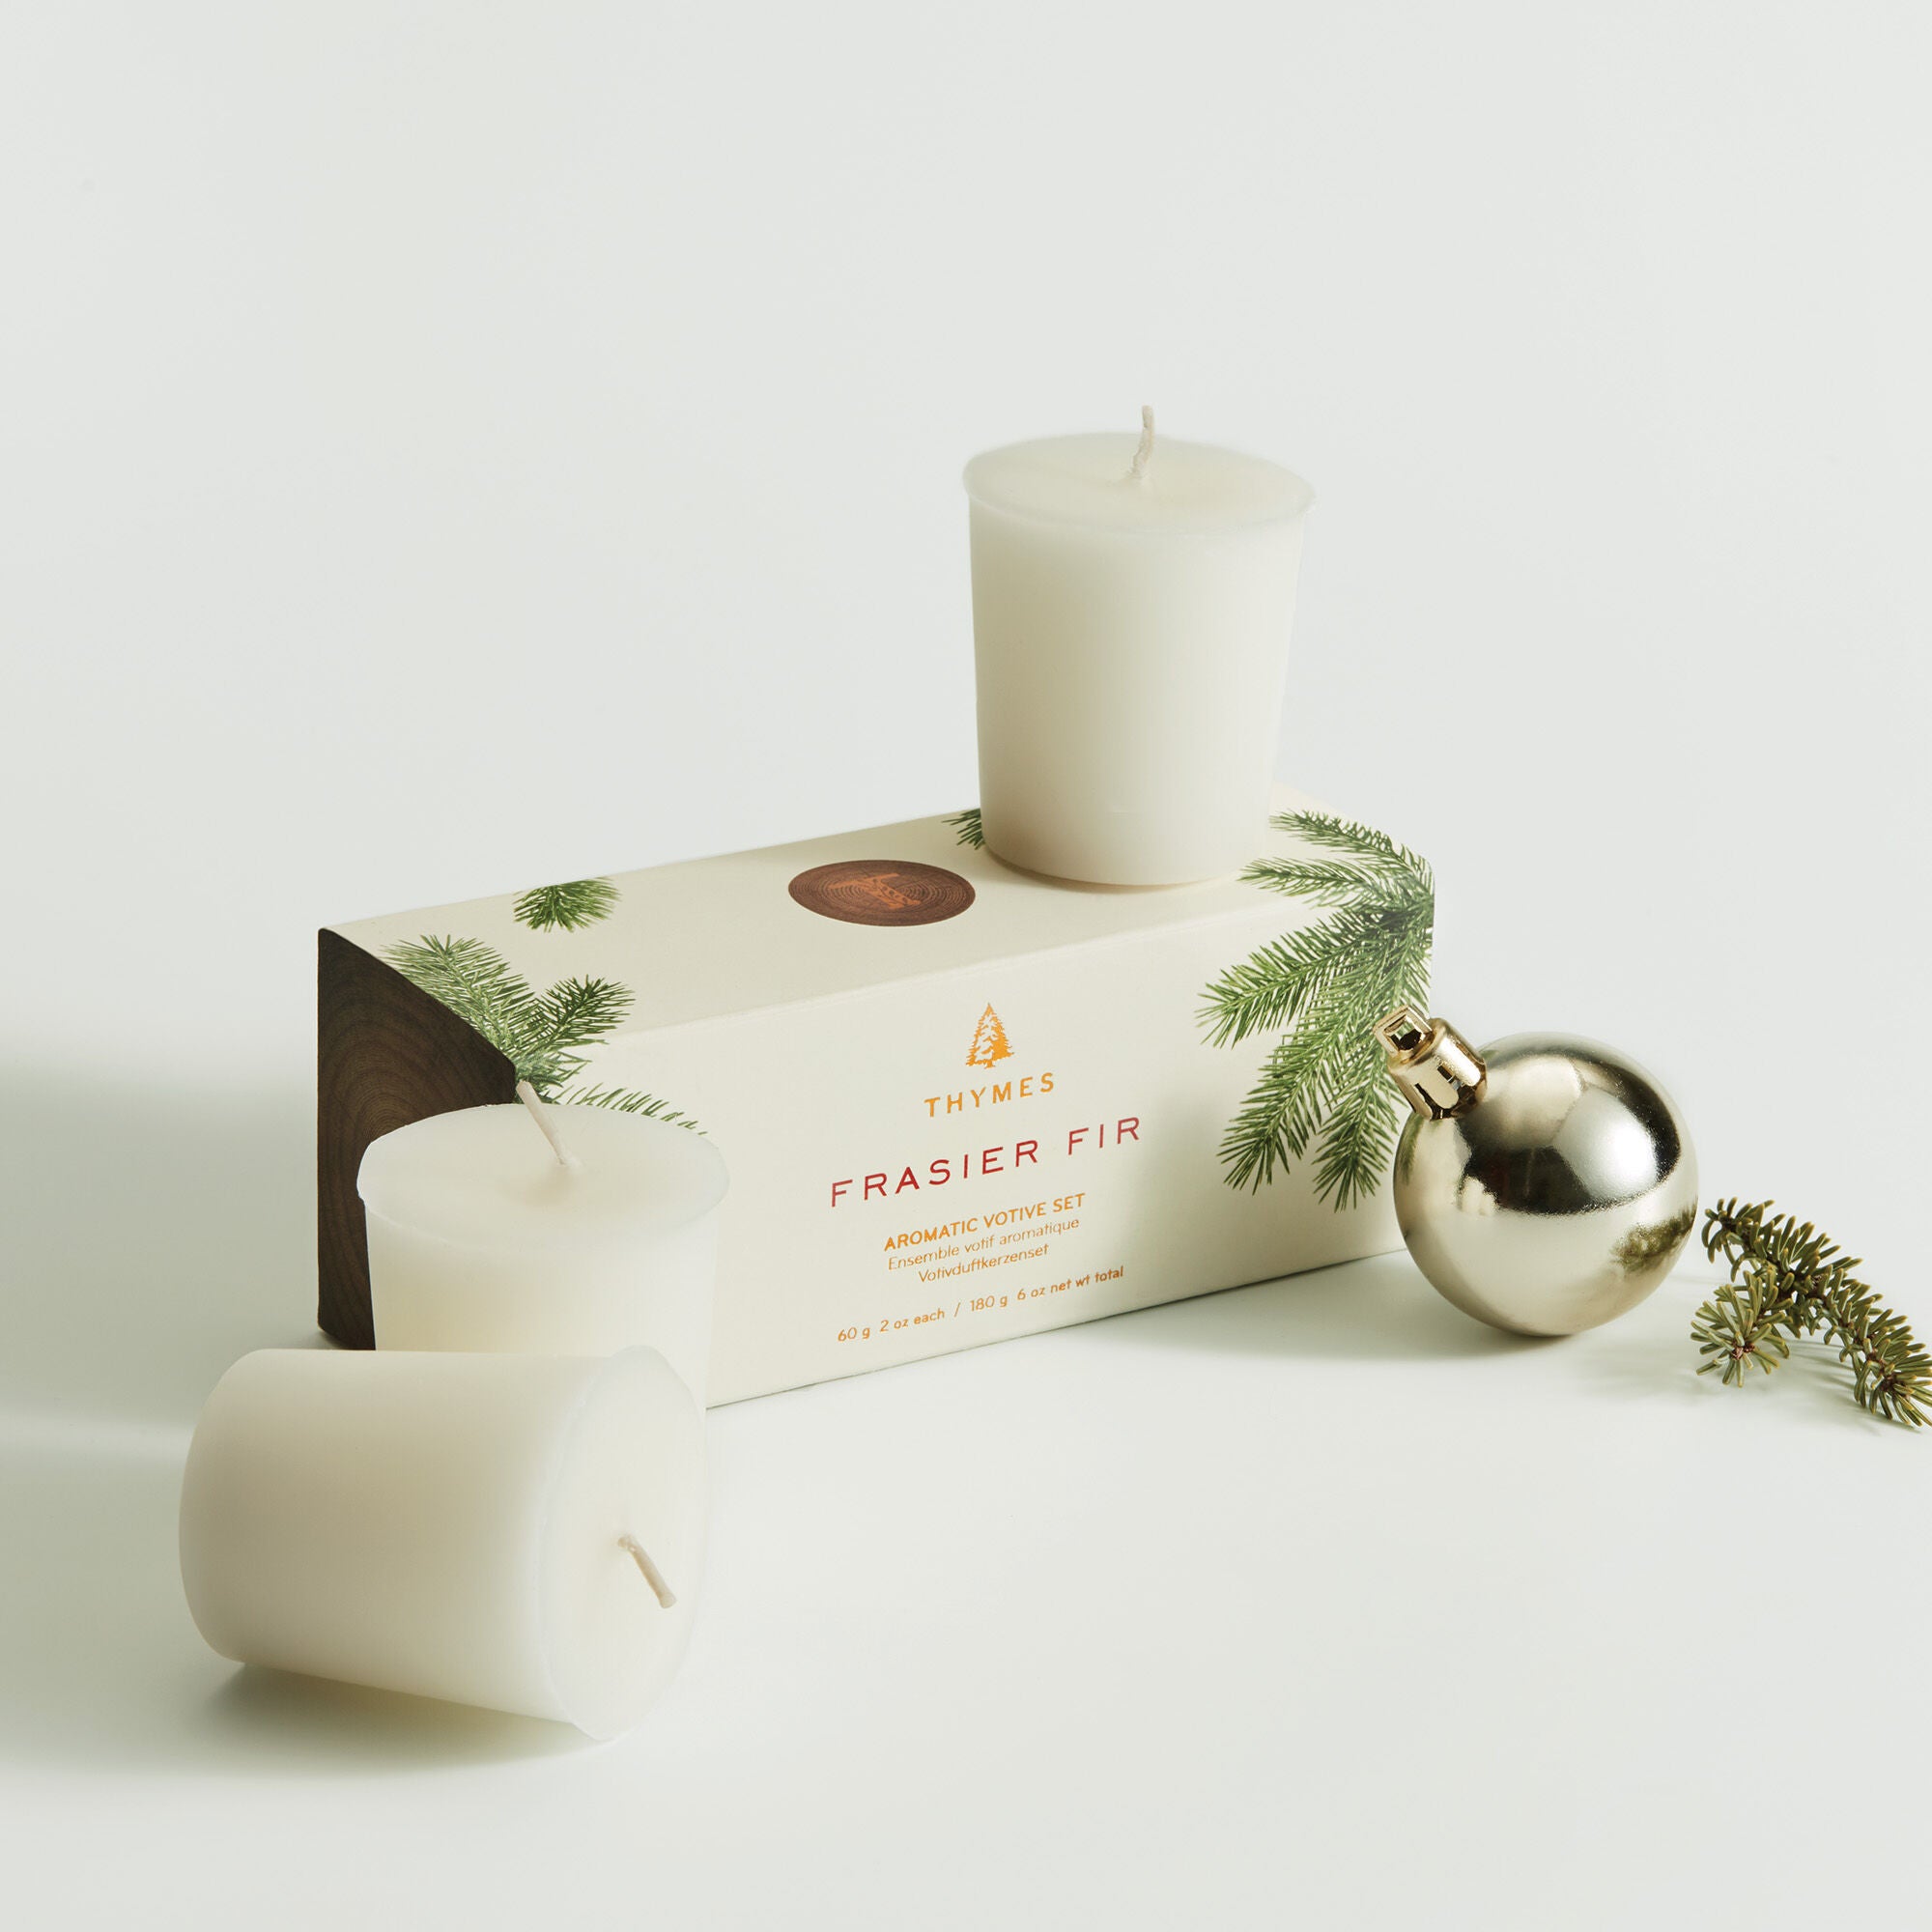 FRASIER FIR AROMATIC VOTIVE SET by THYMES